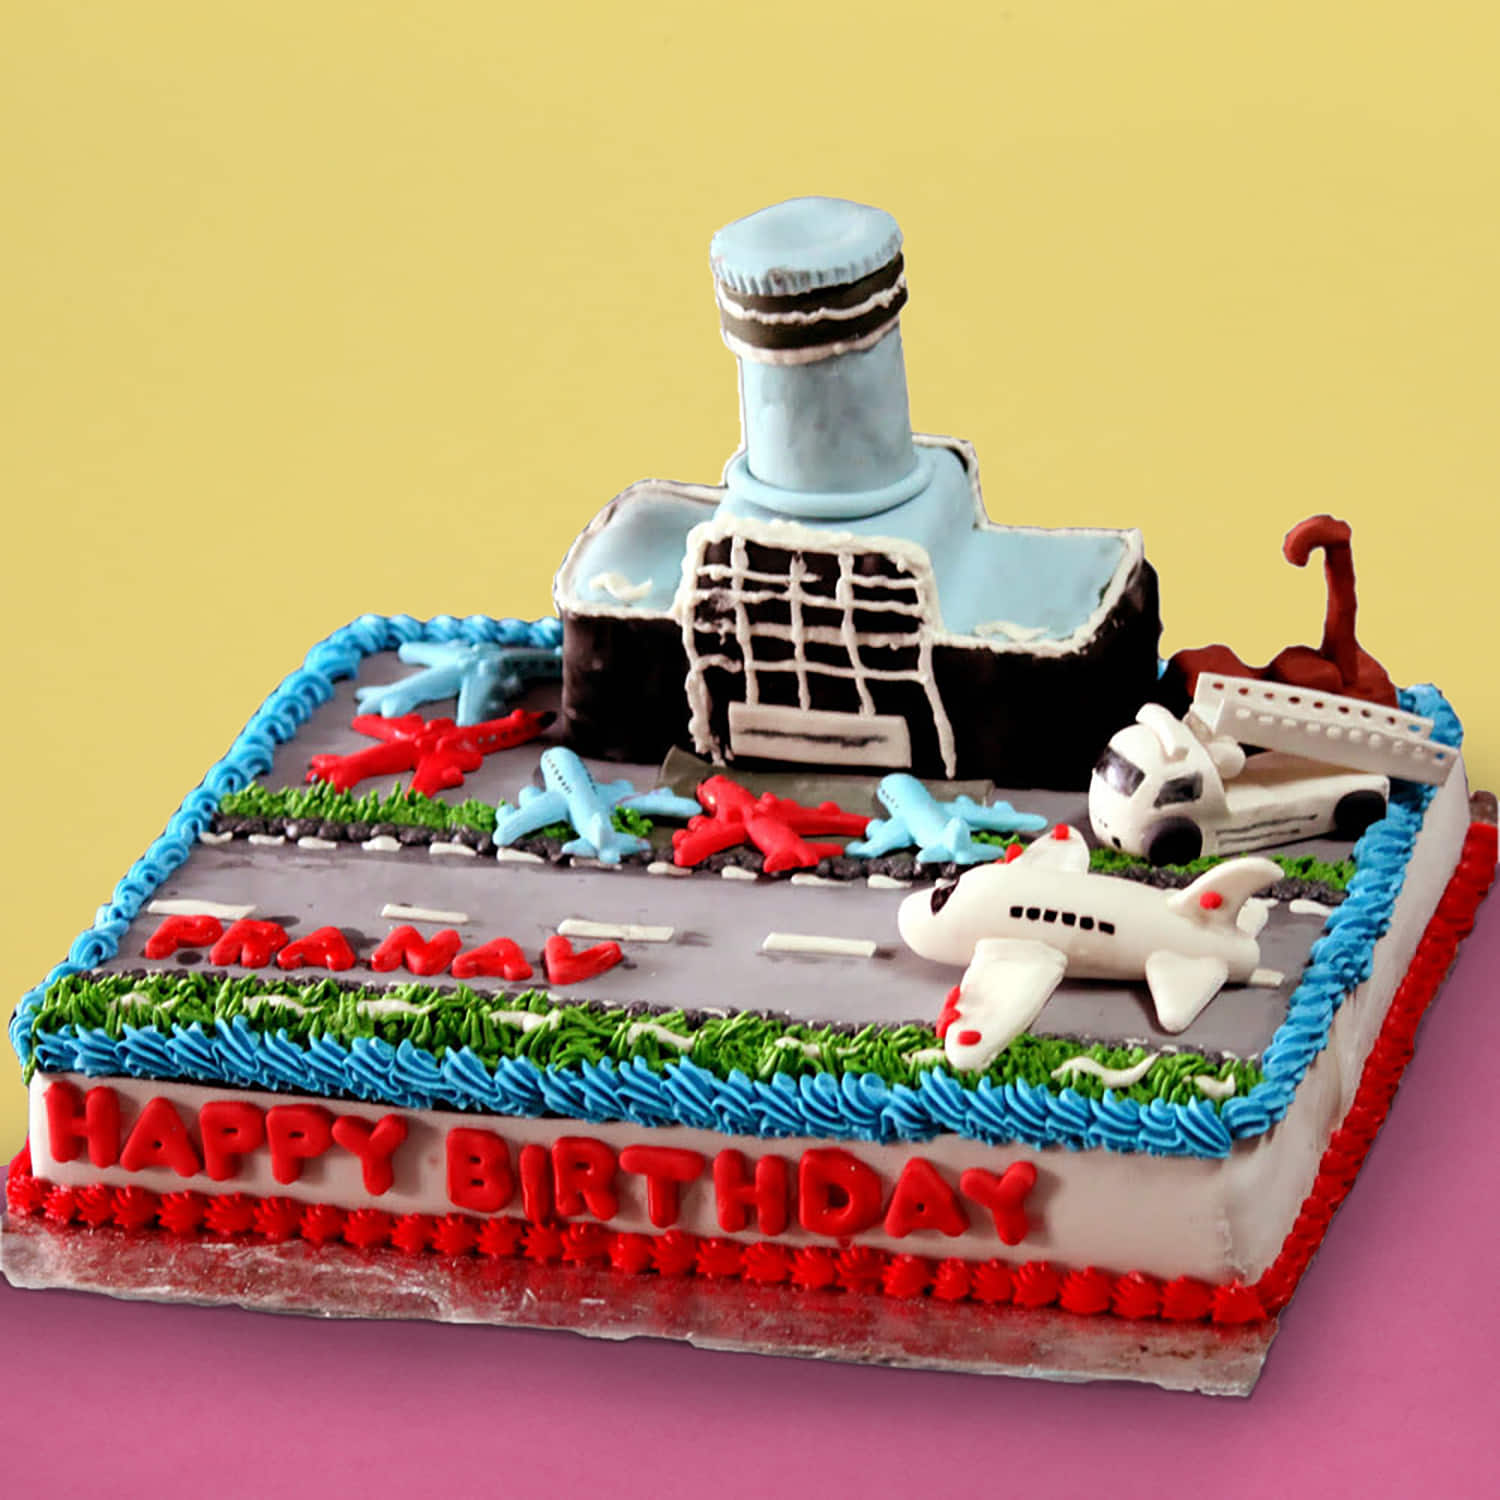 Online Cake Delivery In Mumbai by winnistore on DeviantArt